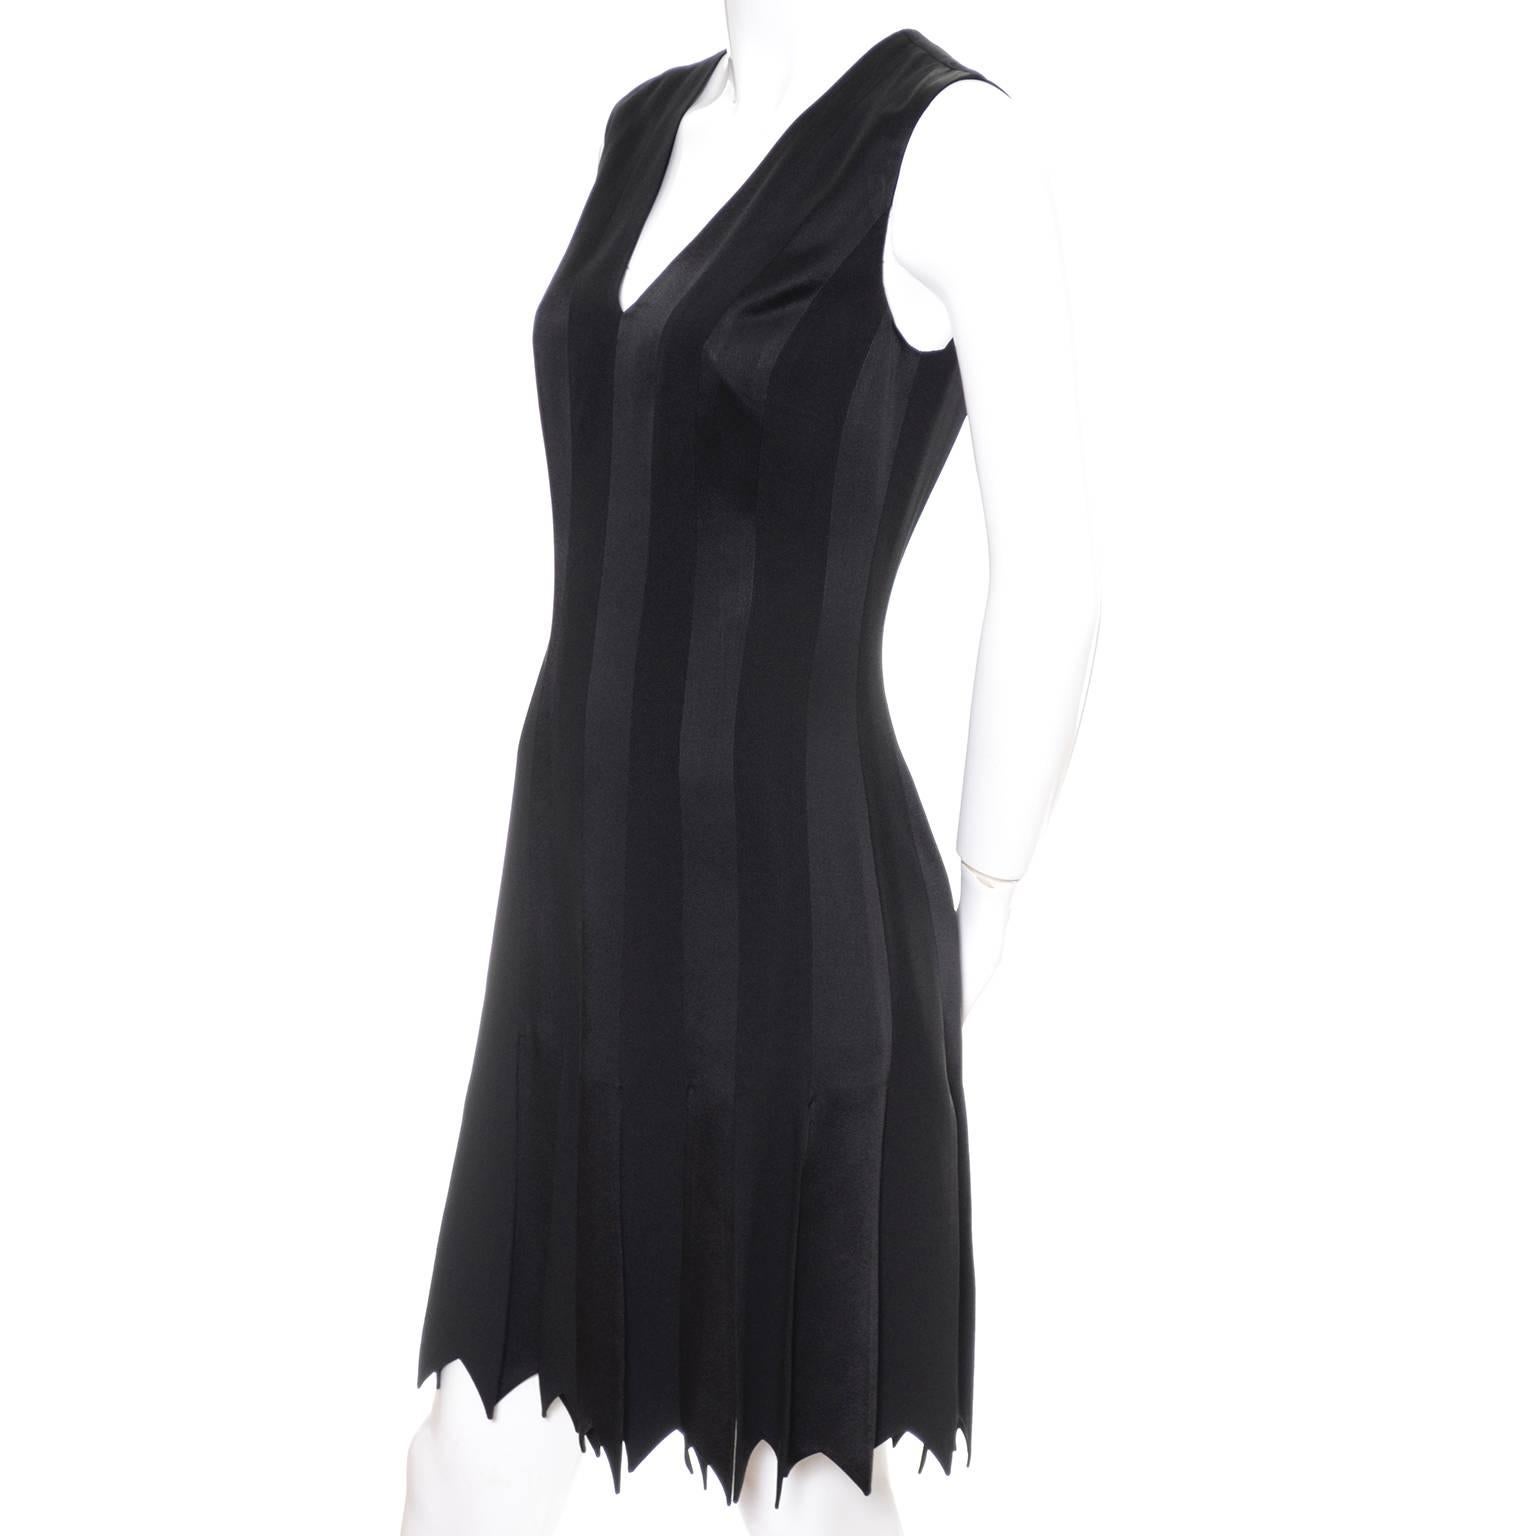 This is a pretty amazing 1990's vintage black dress from Moschino Cheap and Chic. This sleeveless dress has a deep v neck and a back zipper. The hemline is made up of panel strips that resemble wide fringe. I've tried to show these in the